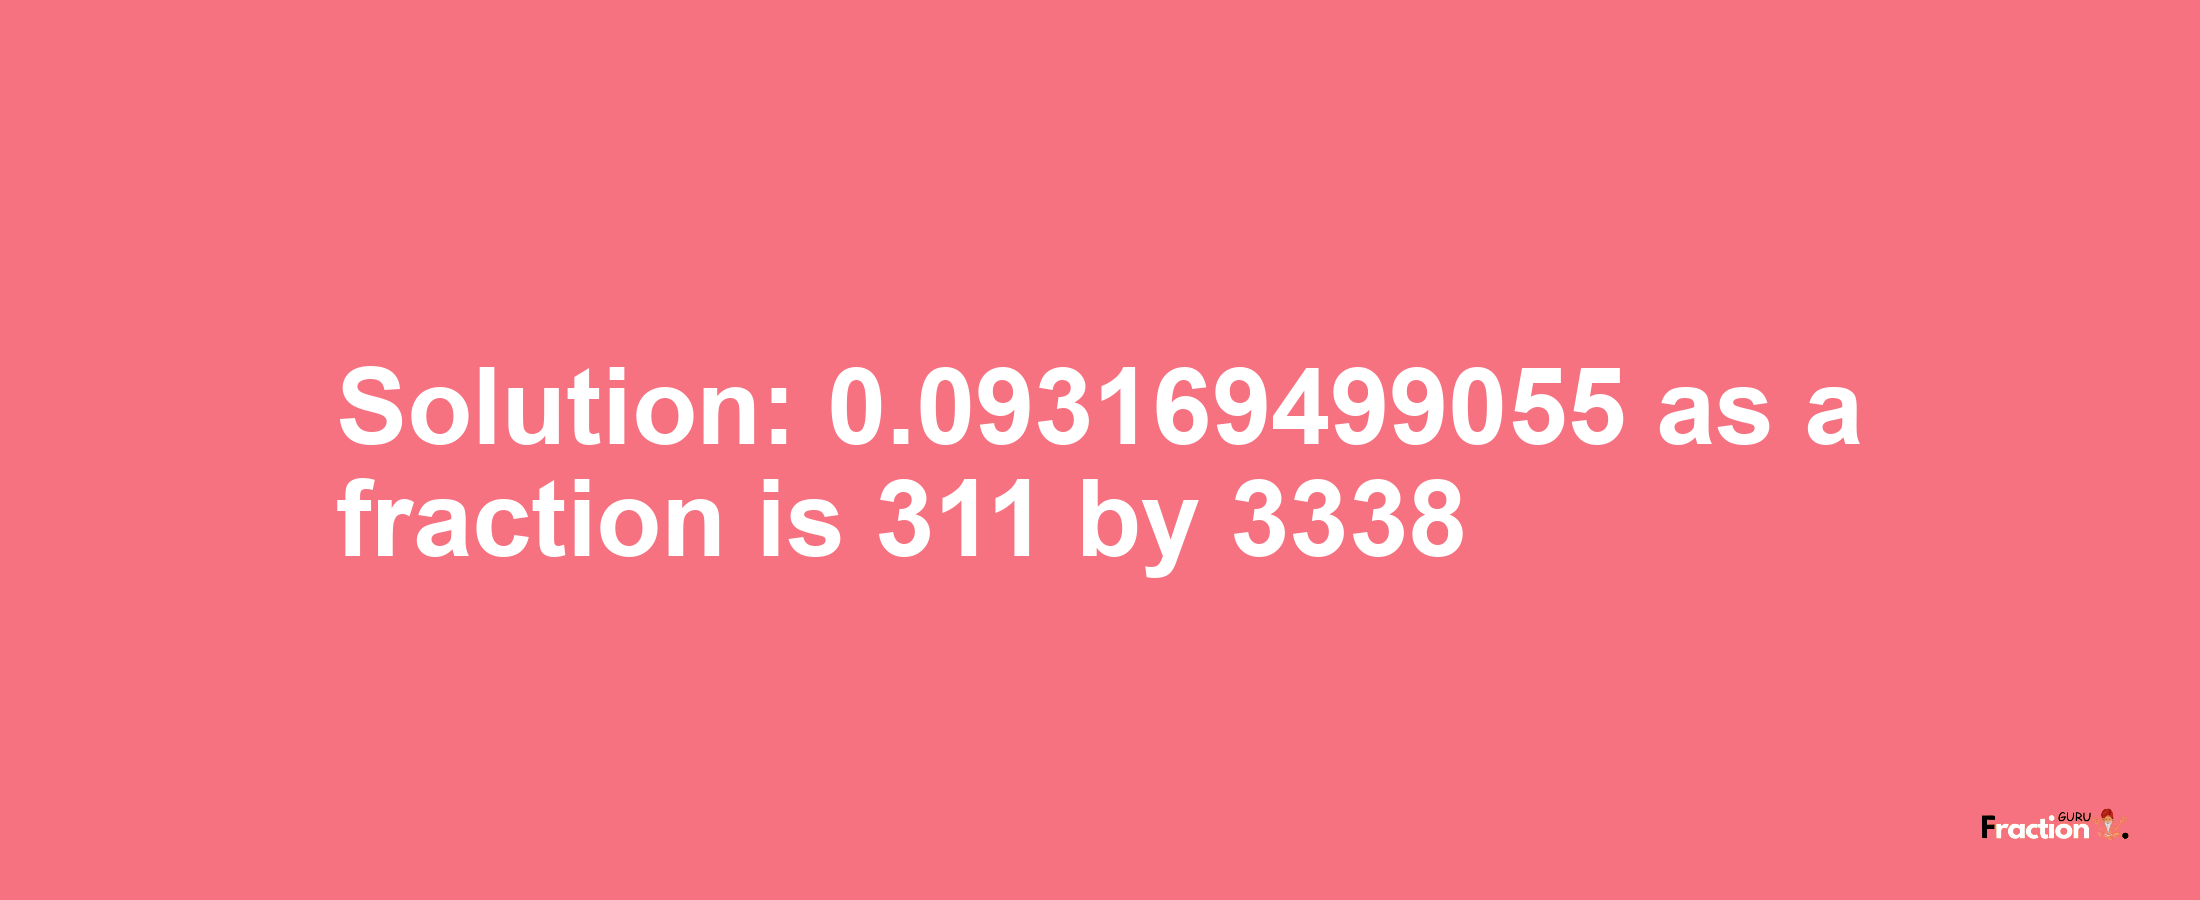 Solution:0.093169499055 as a fraction is 311/3338